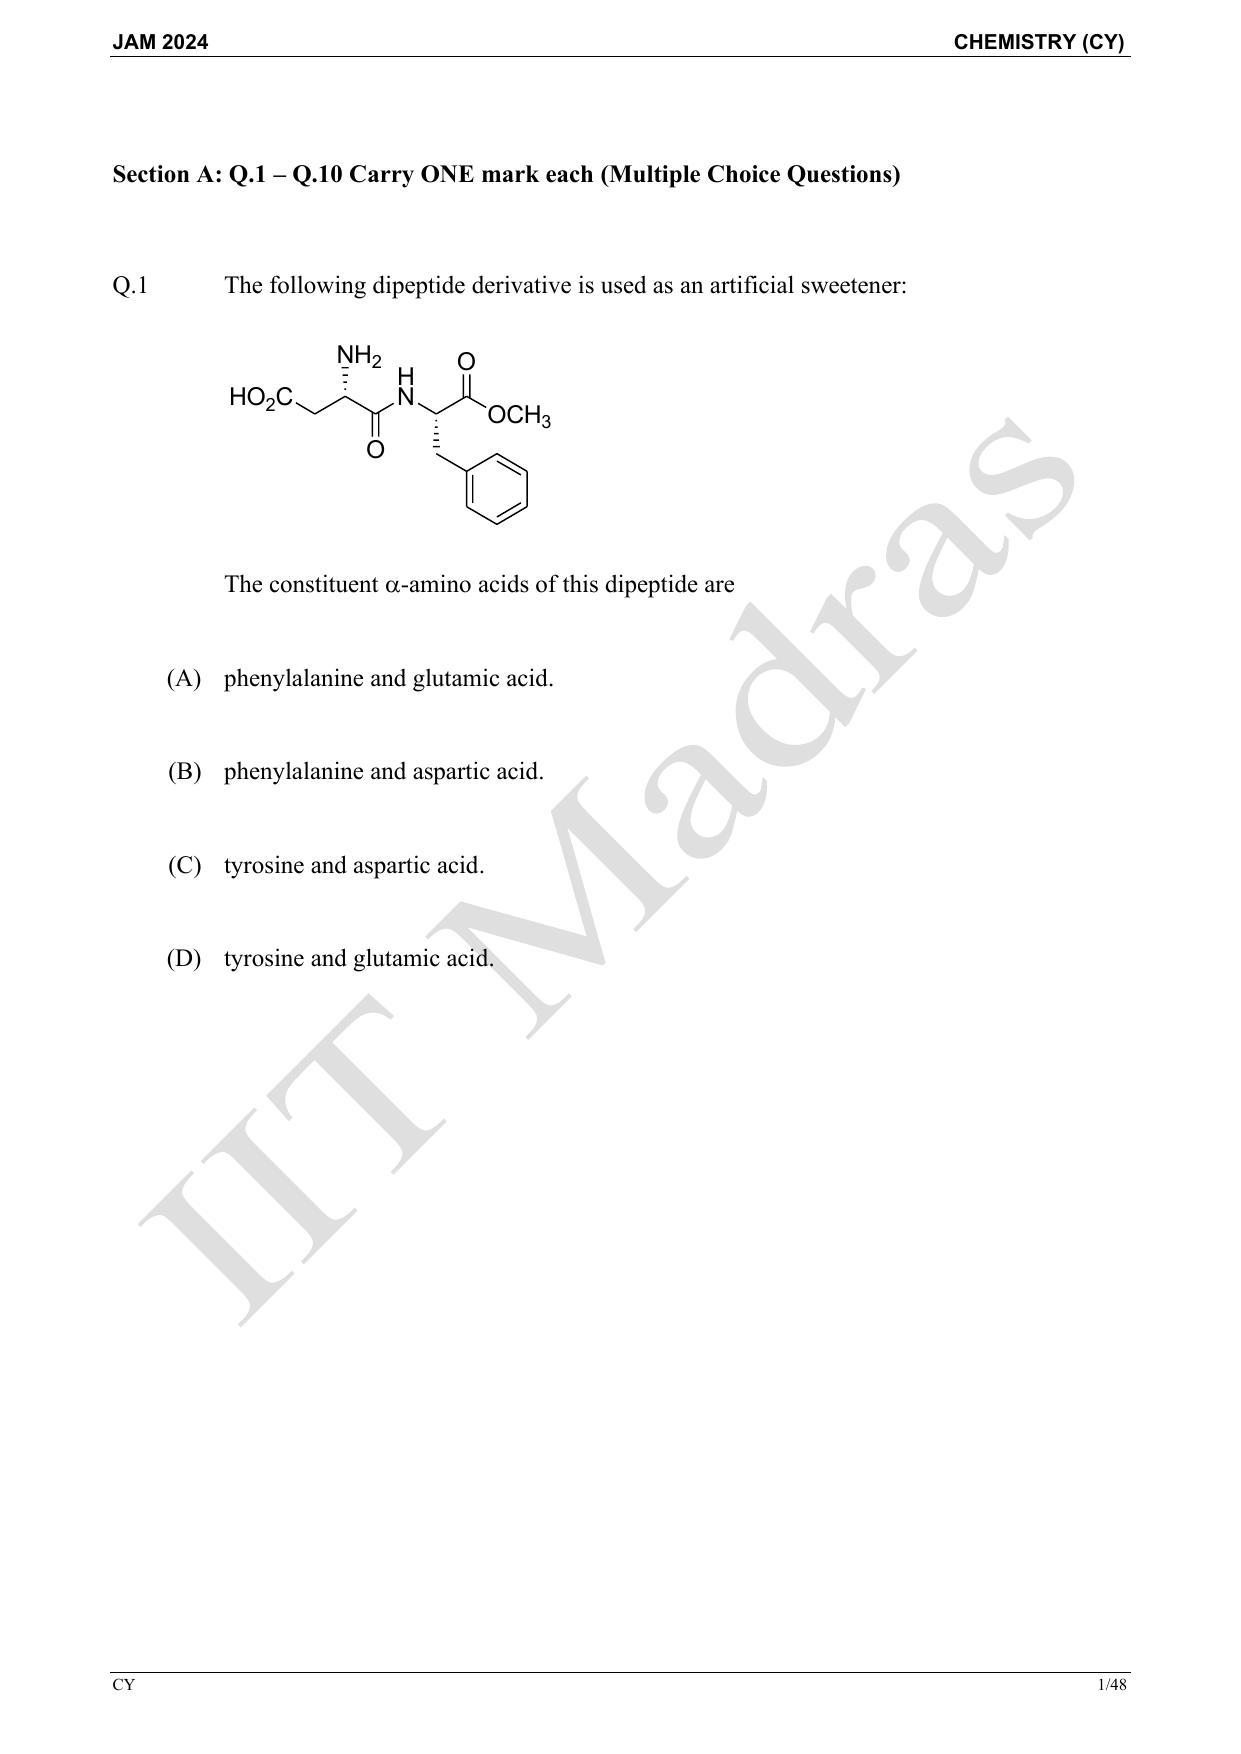 IIT JAM 2024 Chemistry (CY) Master Question Paper - Page 1